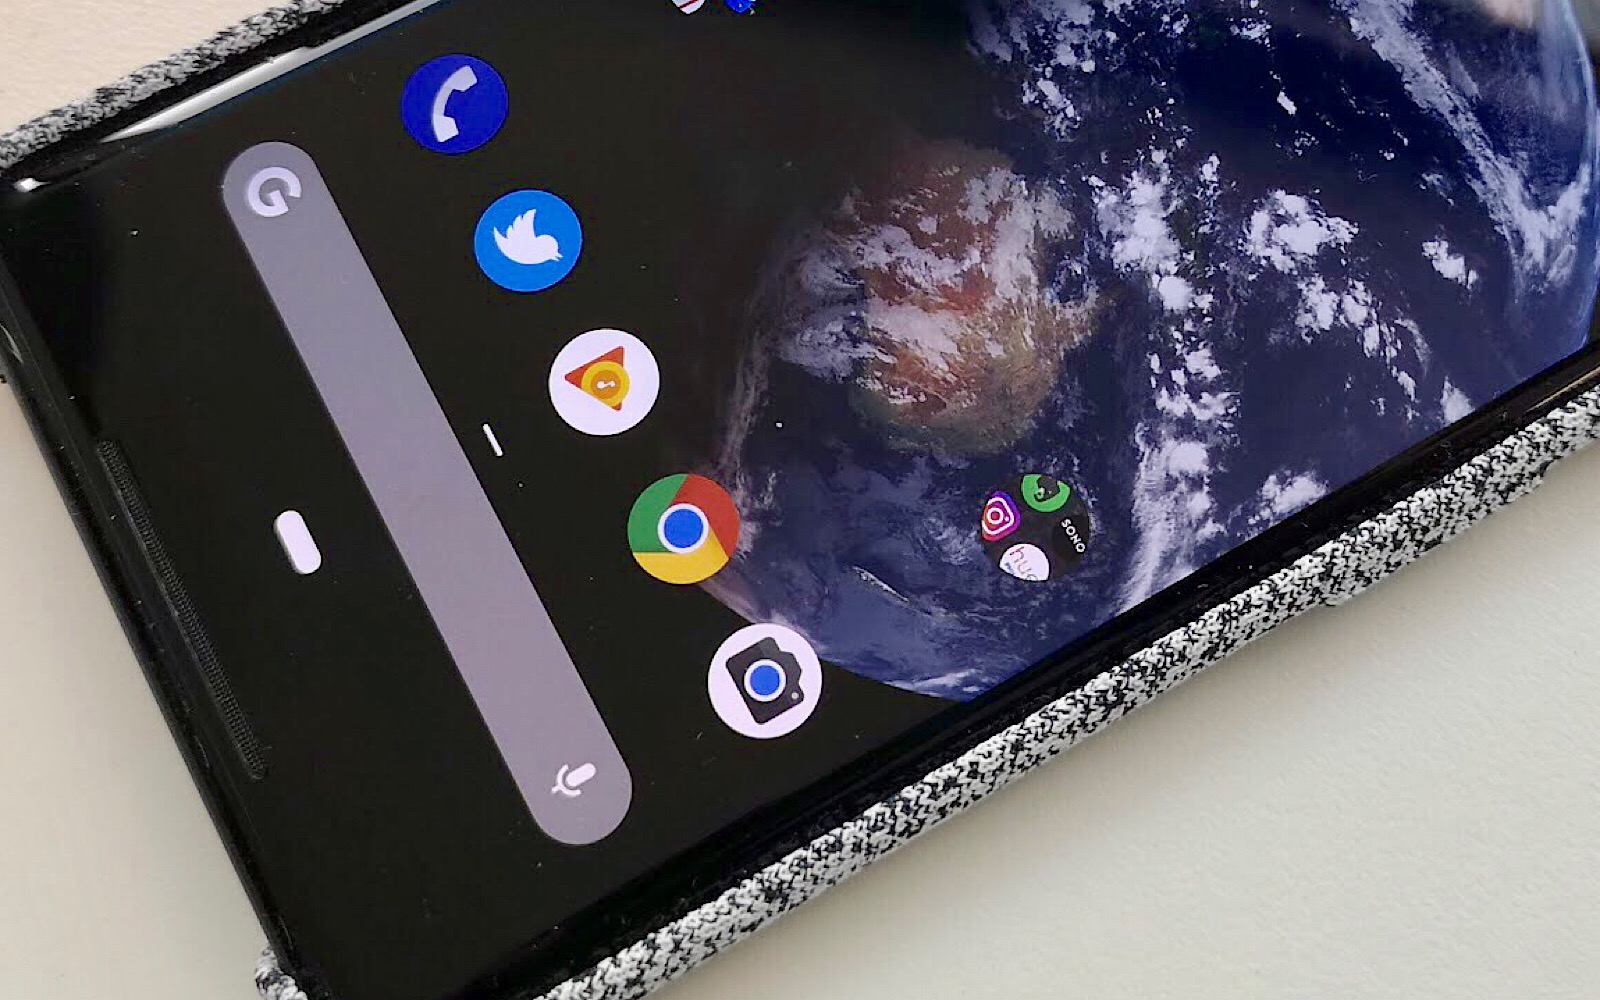 Android P on the Pixel 2 XL